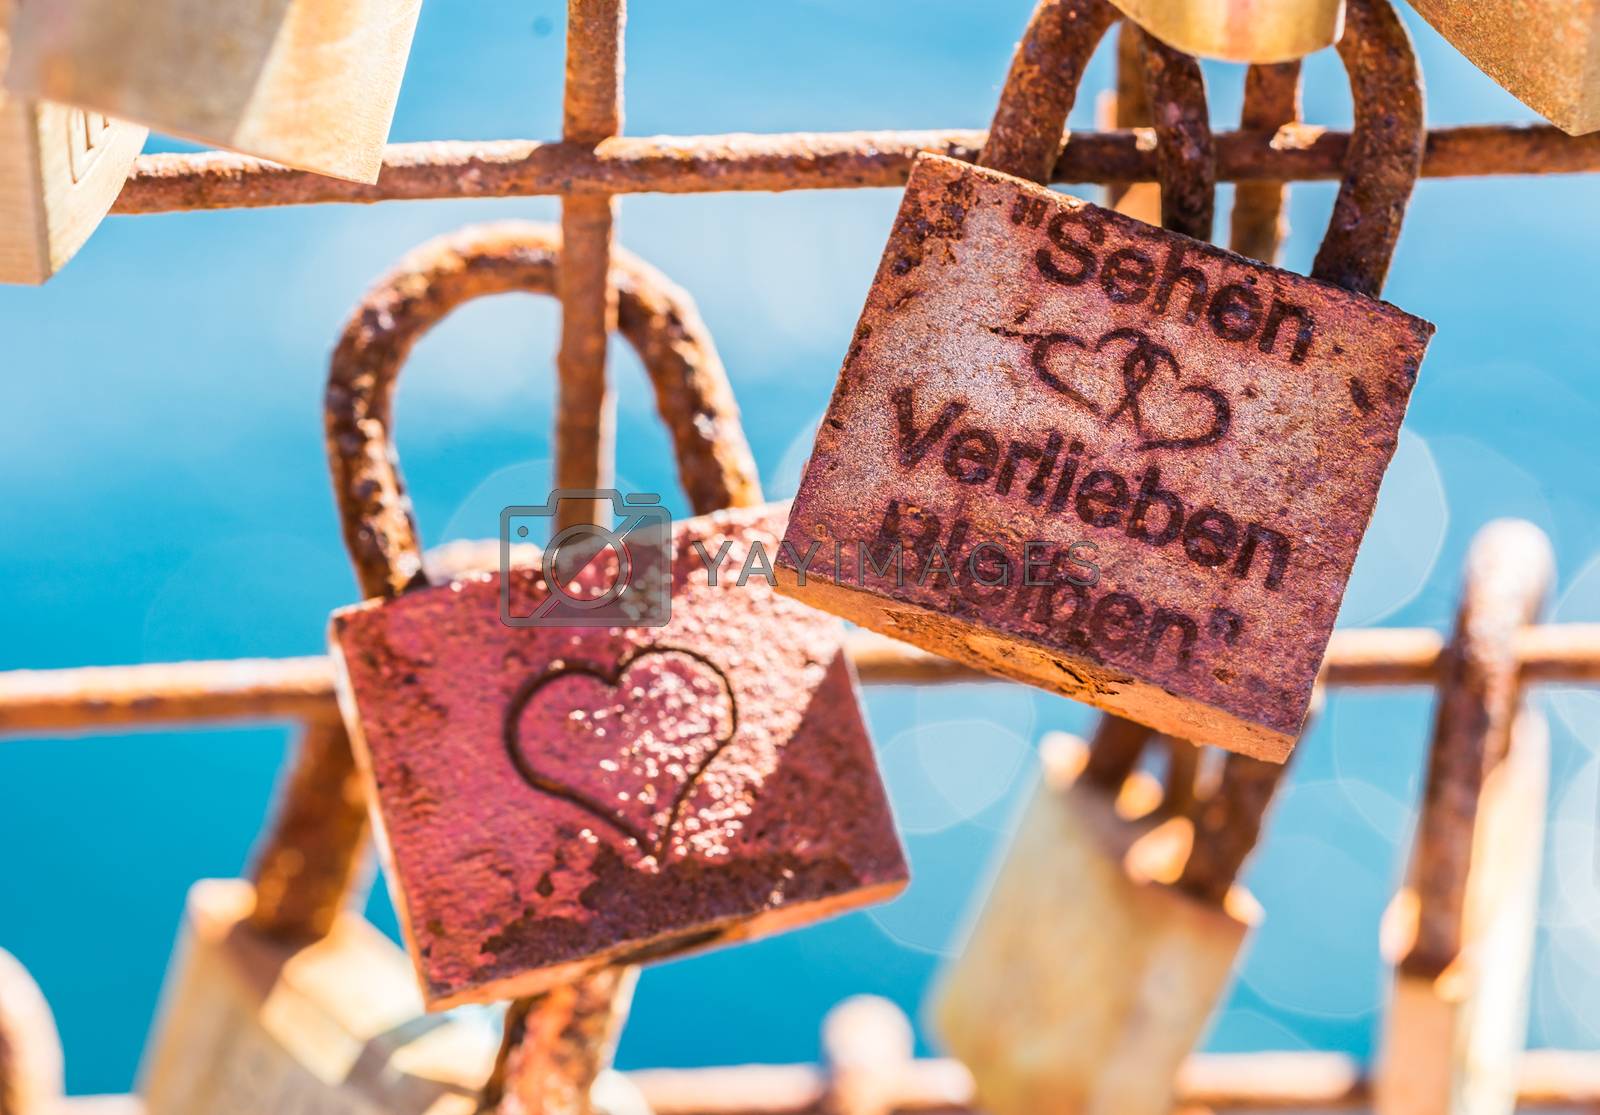 Royalty free image of Old love locks hanging on fence by Vulcano